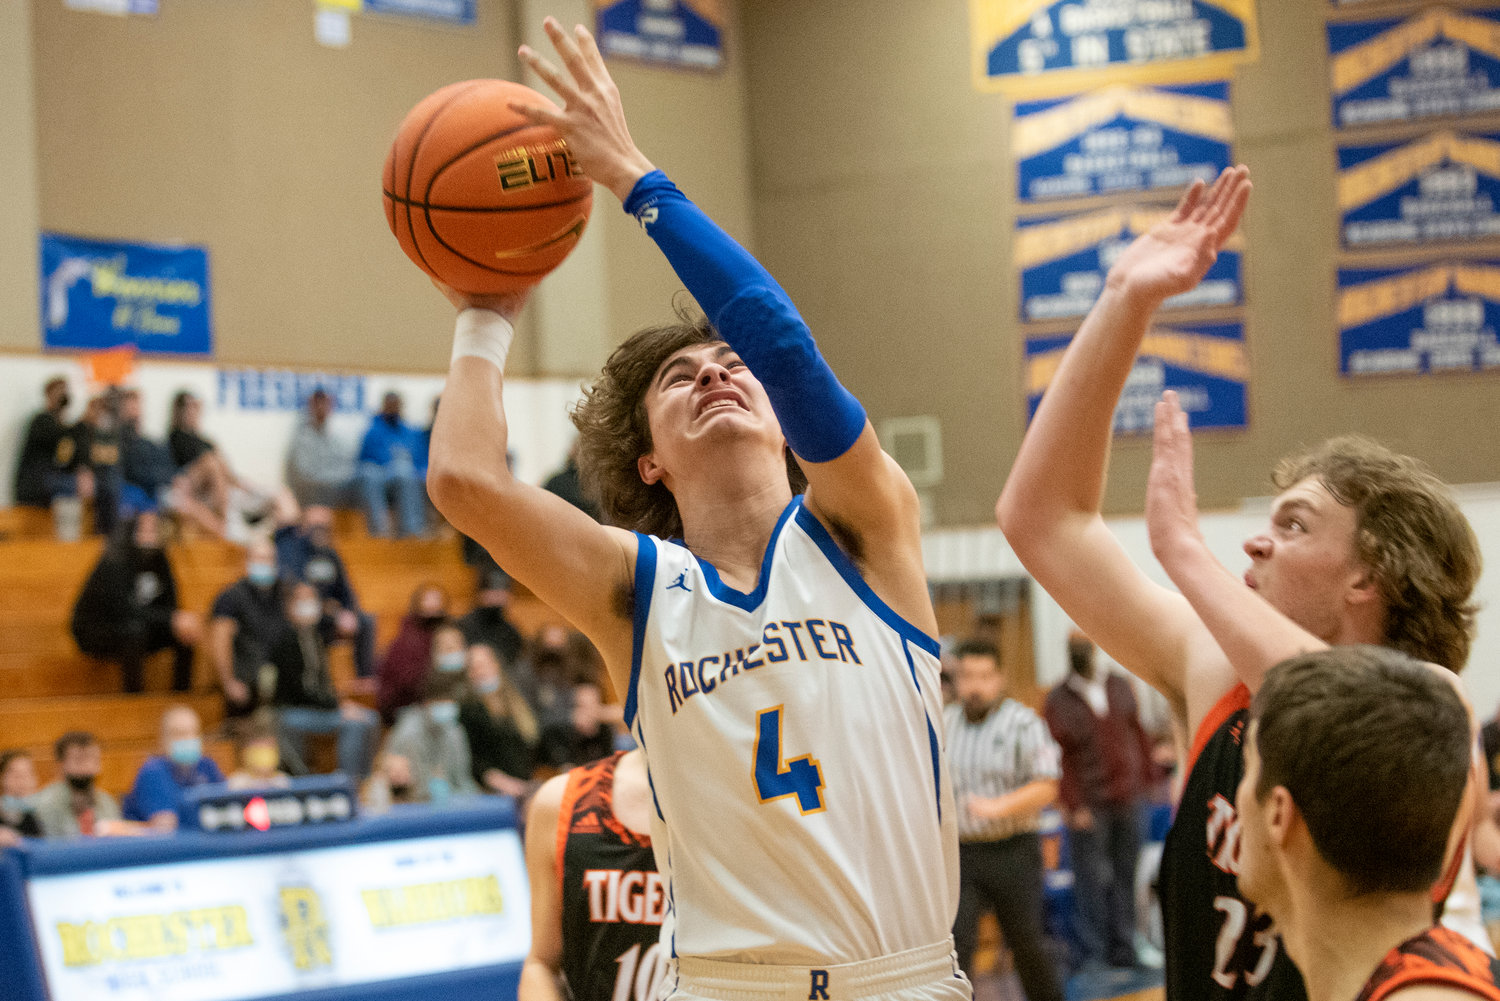 Rochester's Sawyer Robbins (4) goes up for a layin against Centralia at home on Jan. 19.